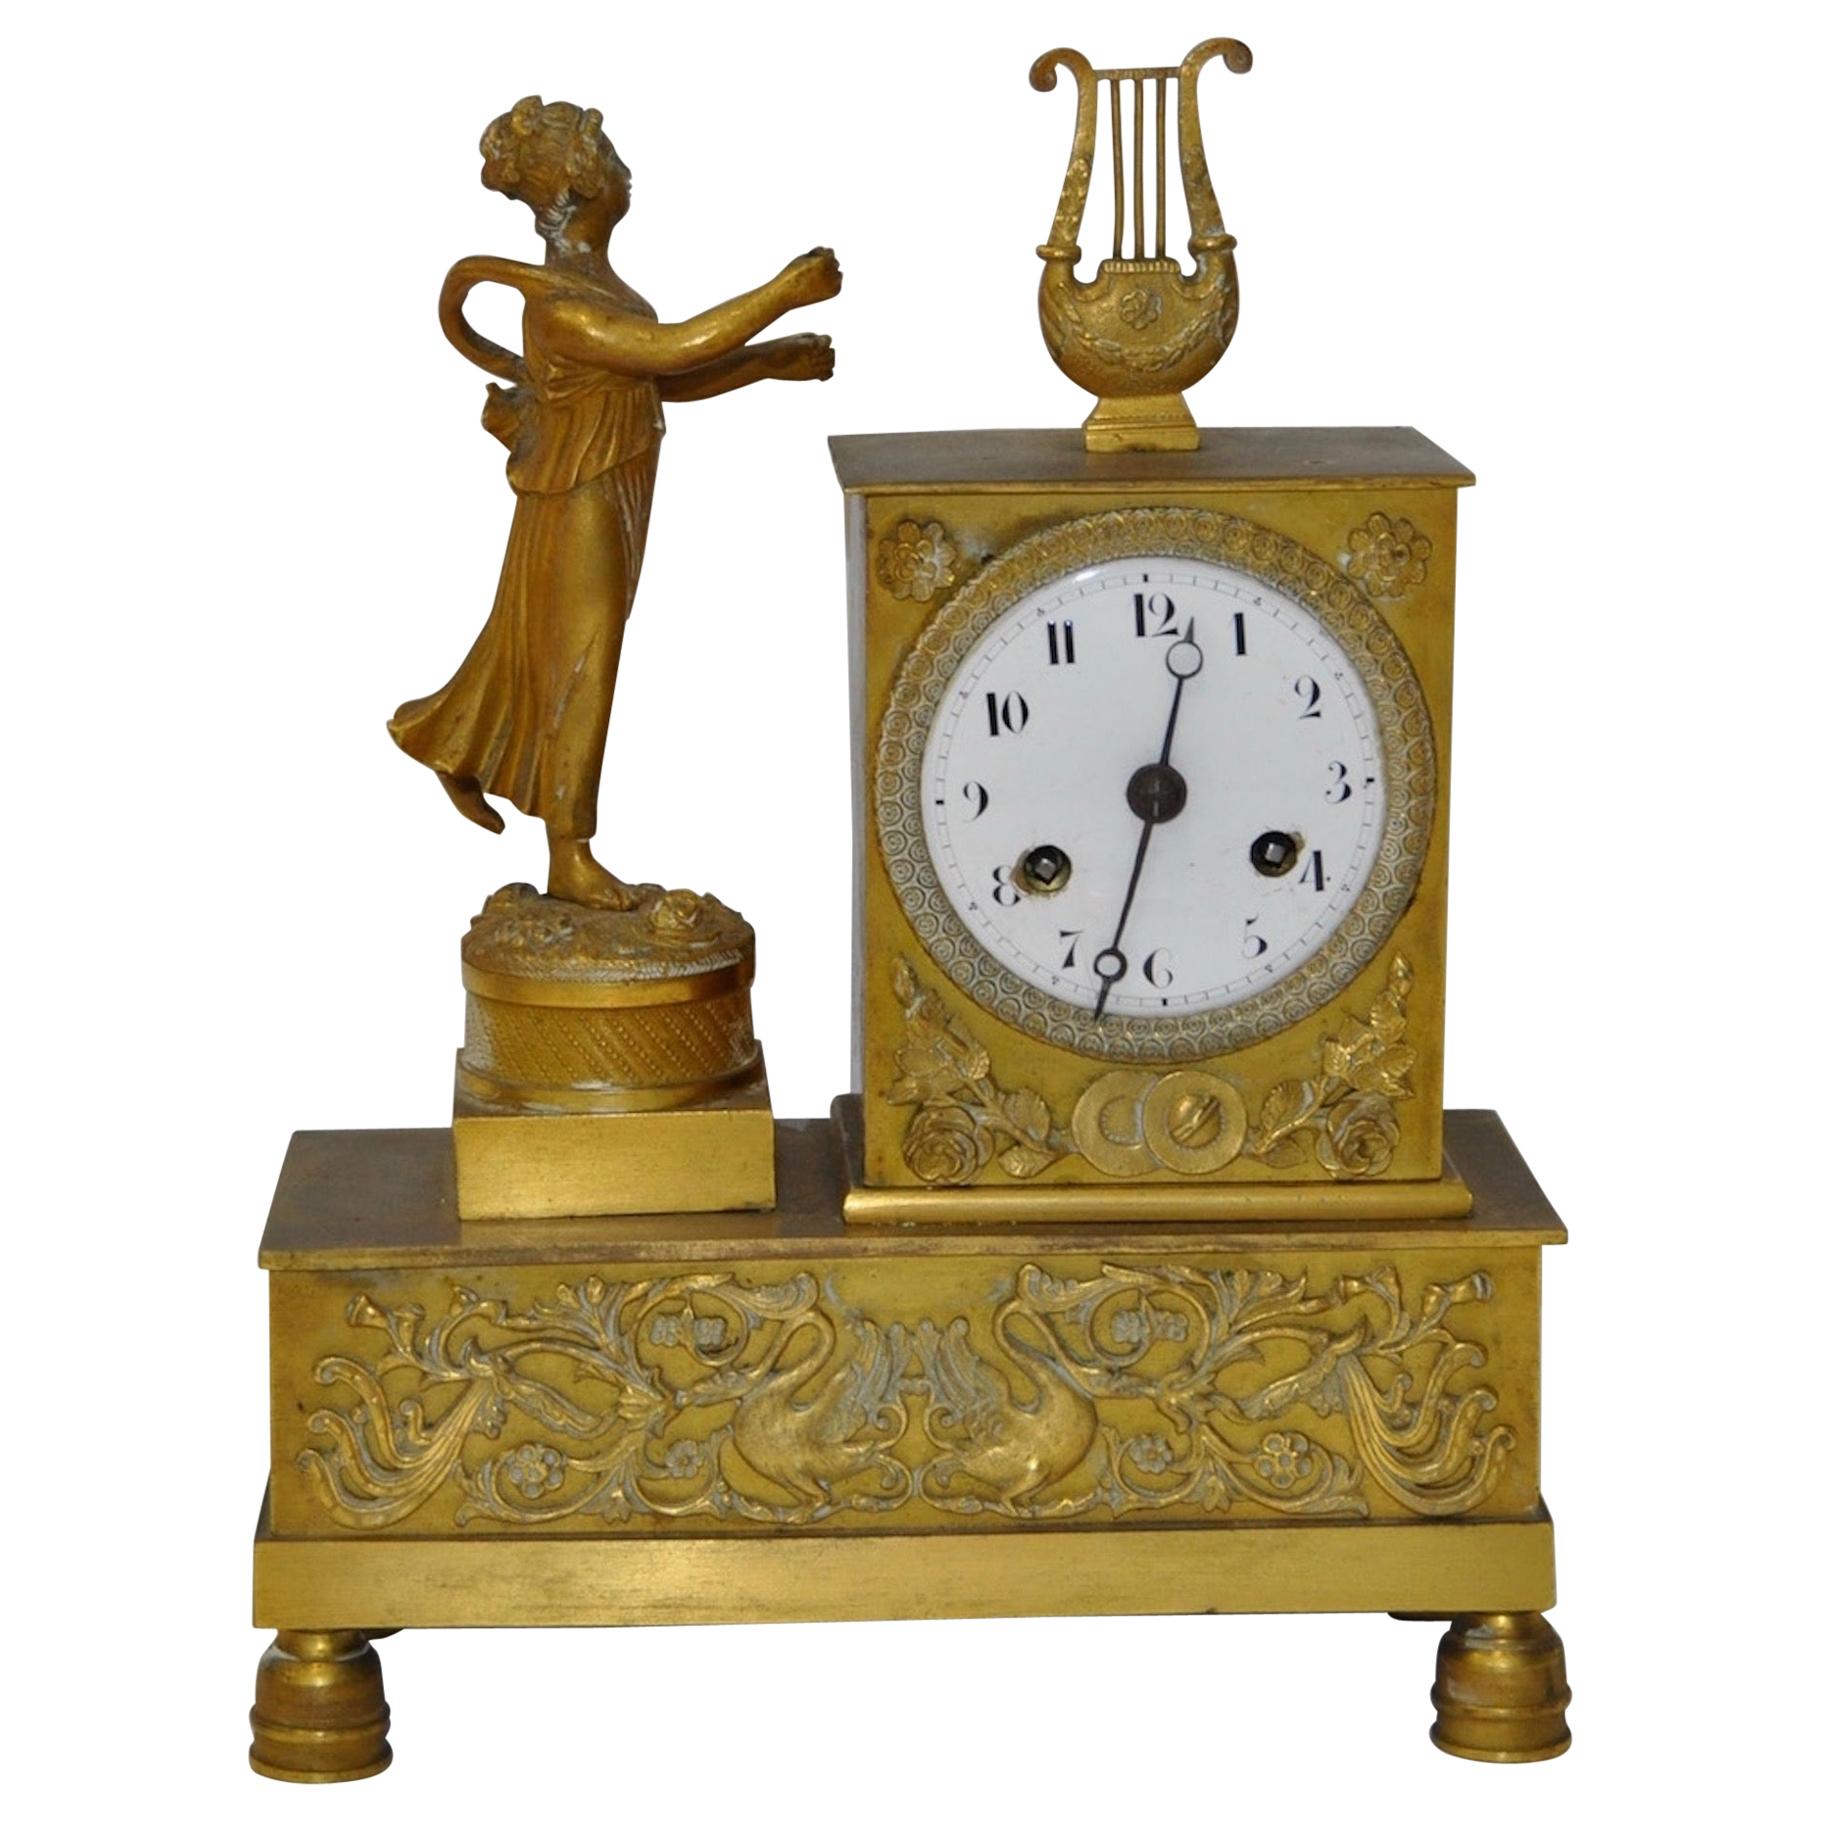 French Gilded Bronze Mantle Clock with Standing Figure, circa 1840s